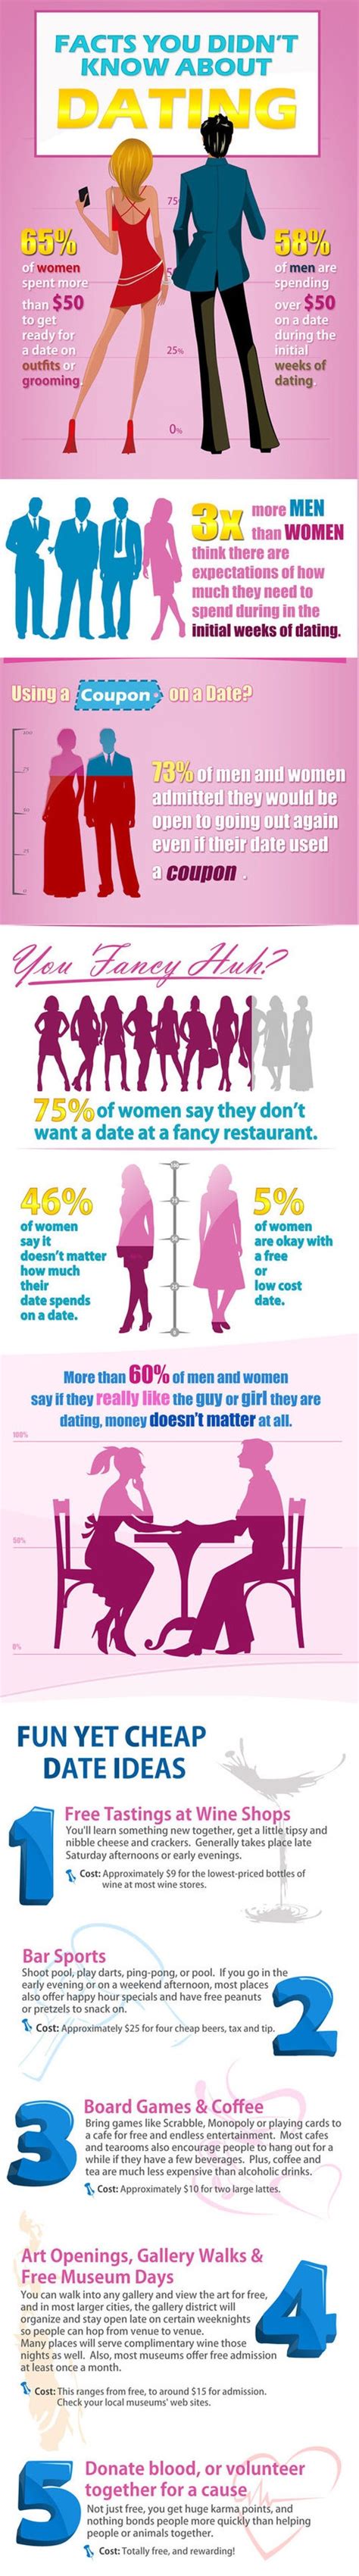 valentine s day and dating infographic funny dating memes funny dating quotes cheap date ideas